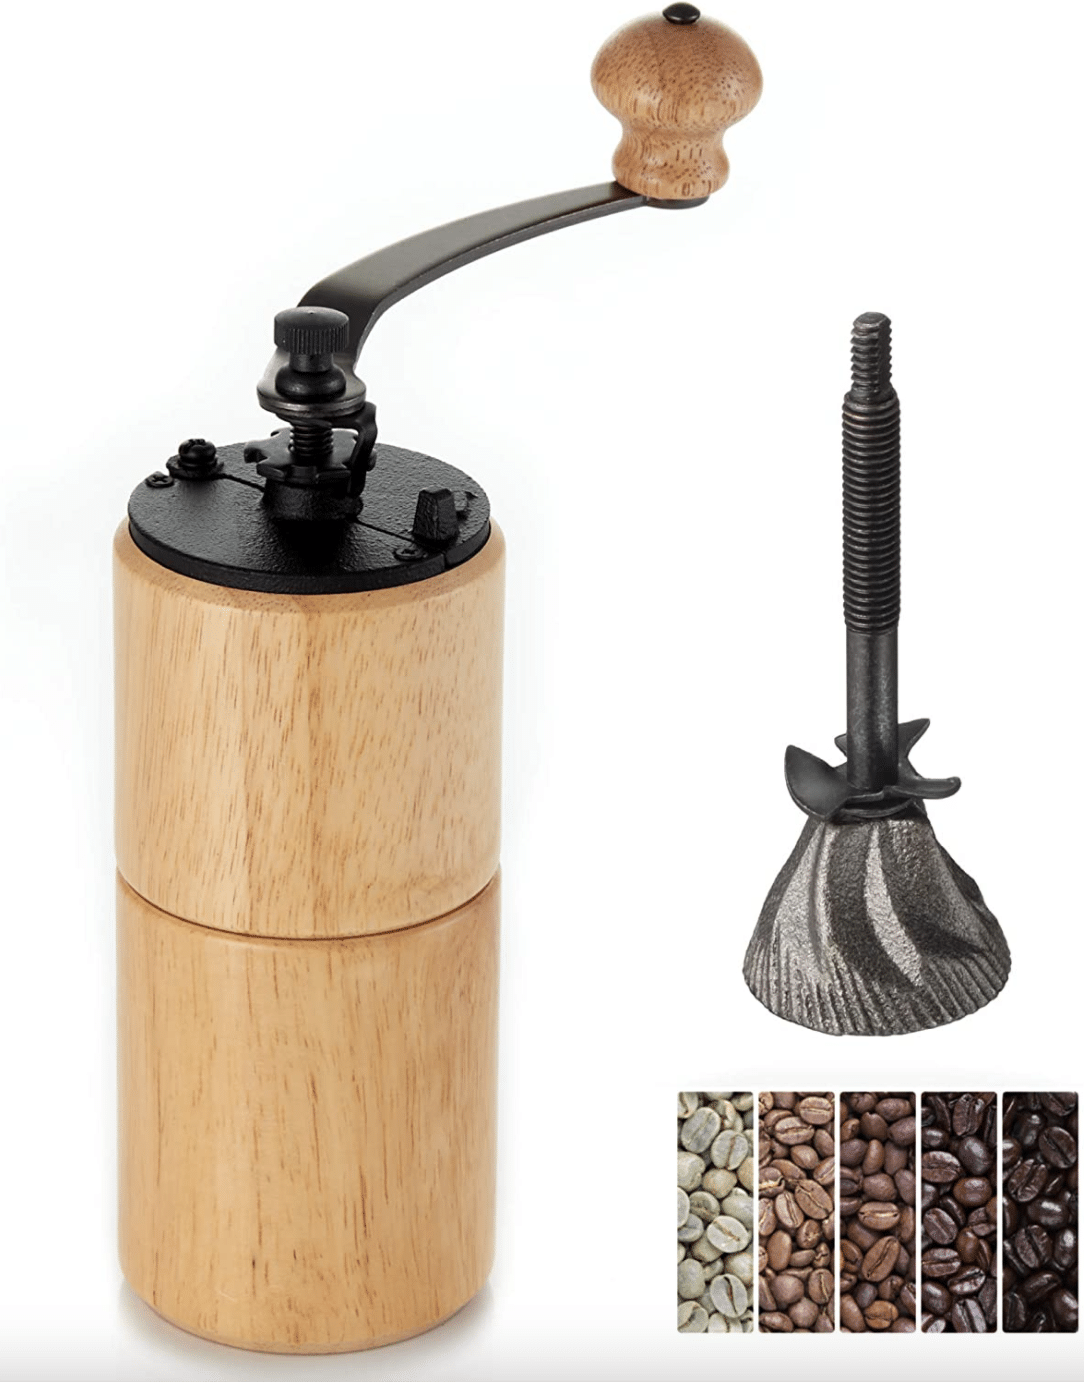 Suyi Stainless Steel Manual Coffee Bean Grinder Mill Conical Burr Mill for Precision Brewing 